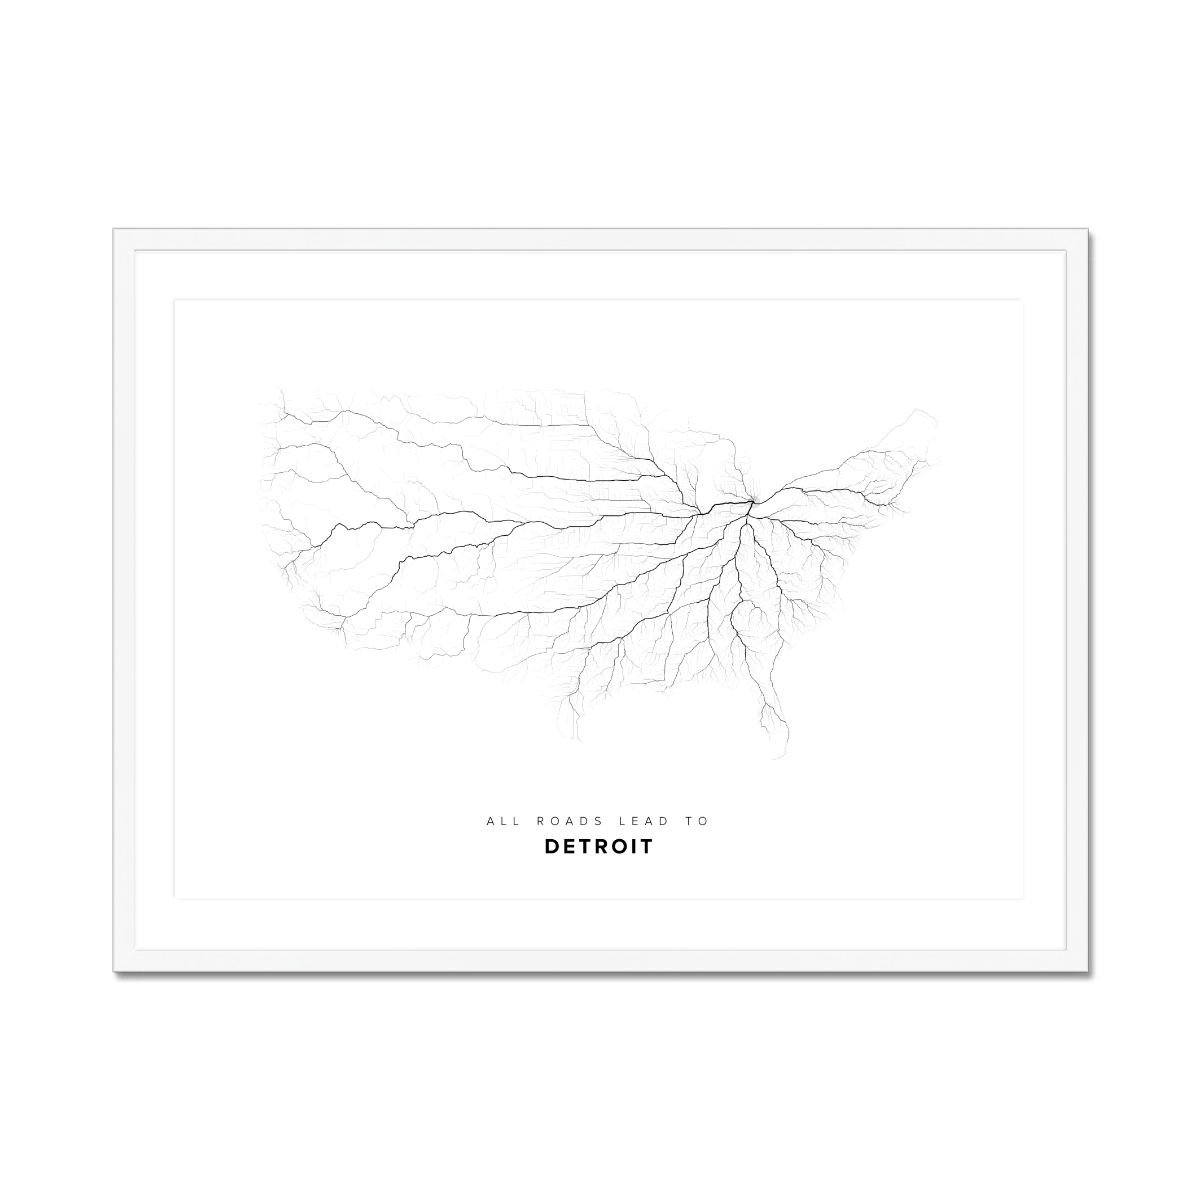 All roads lead to Detroit (United States of America) Fine Art Map Print